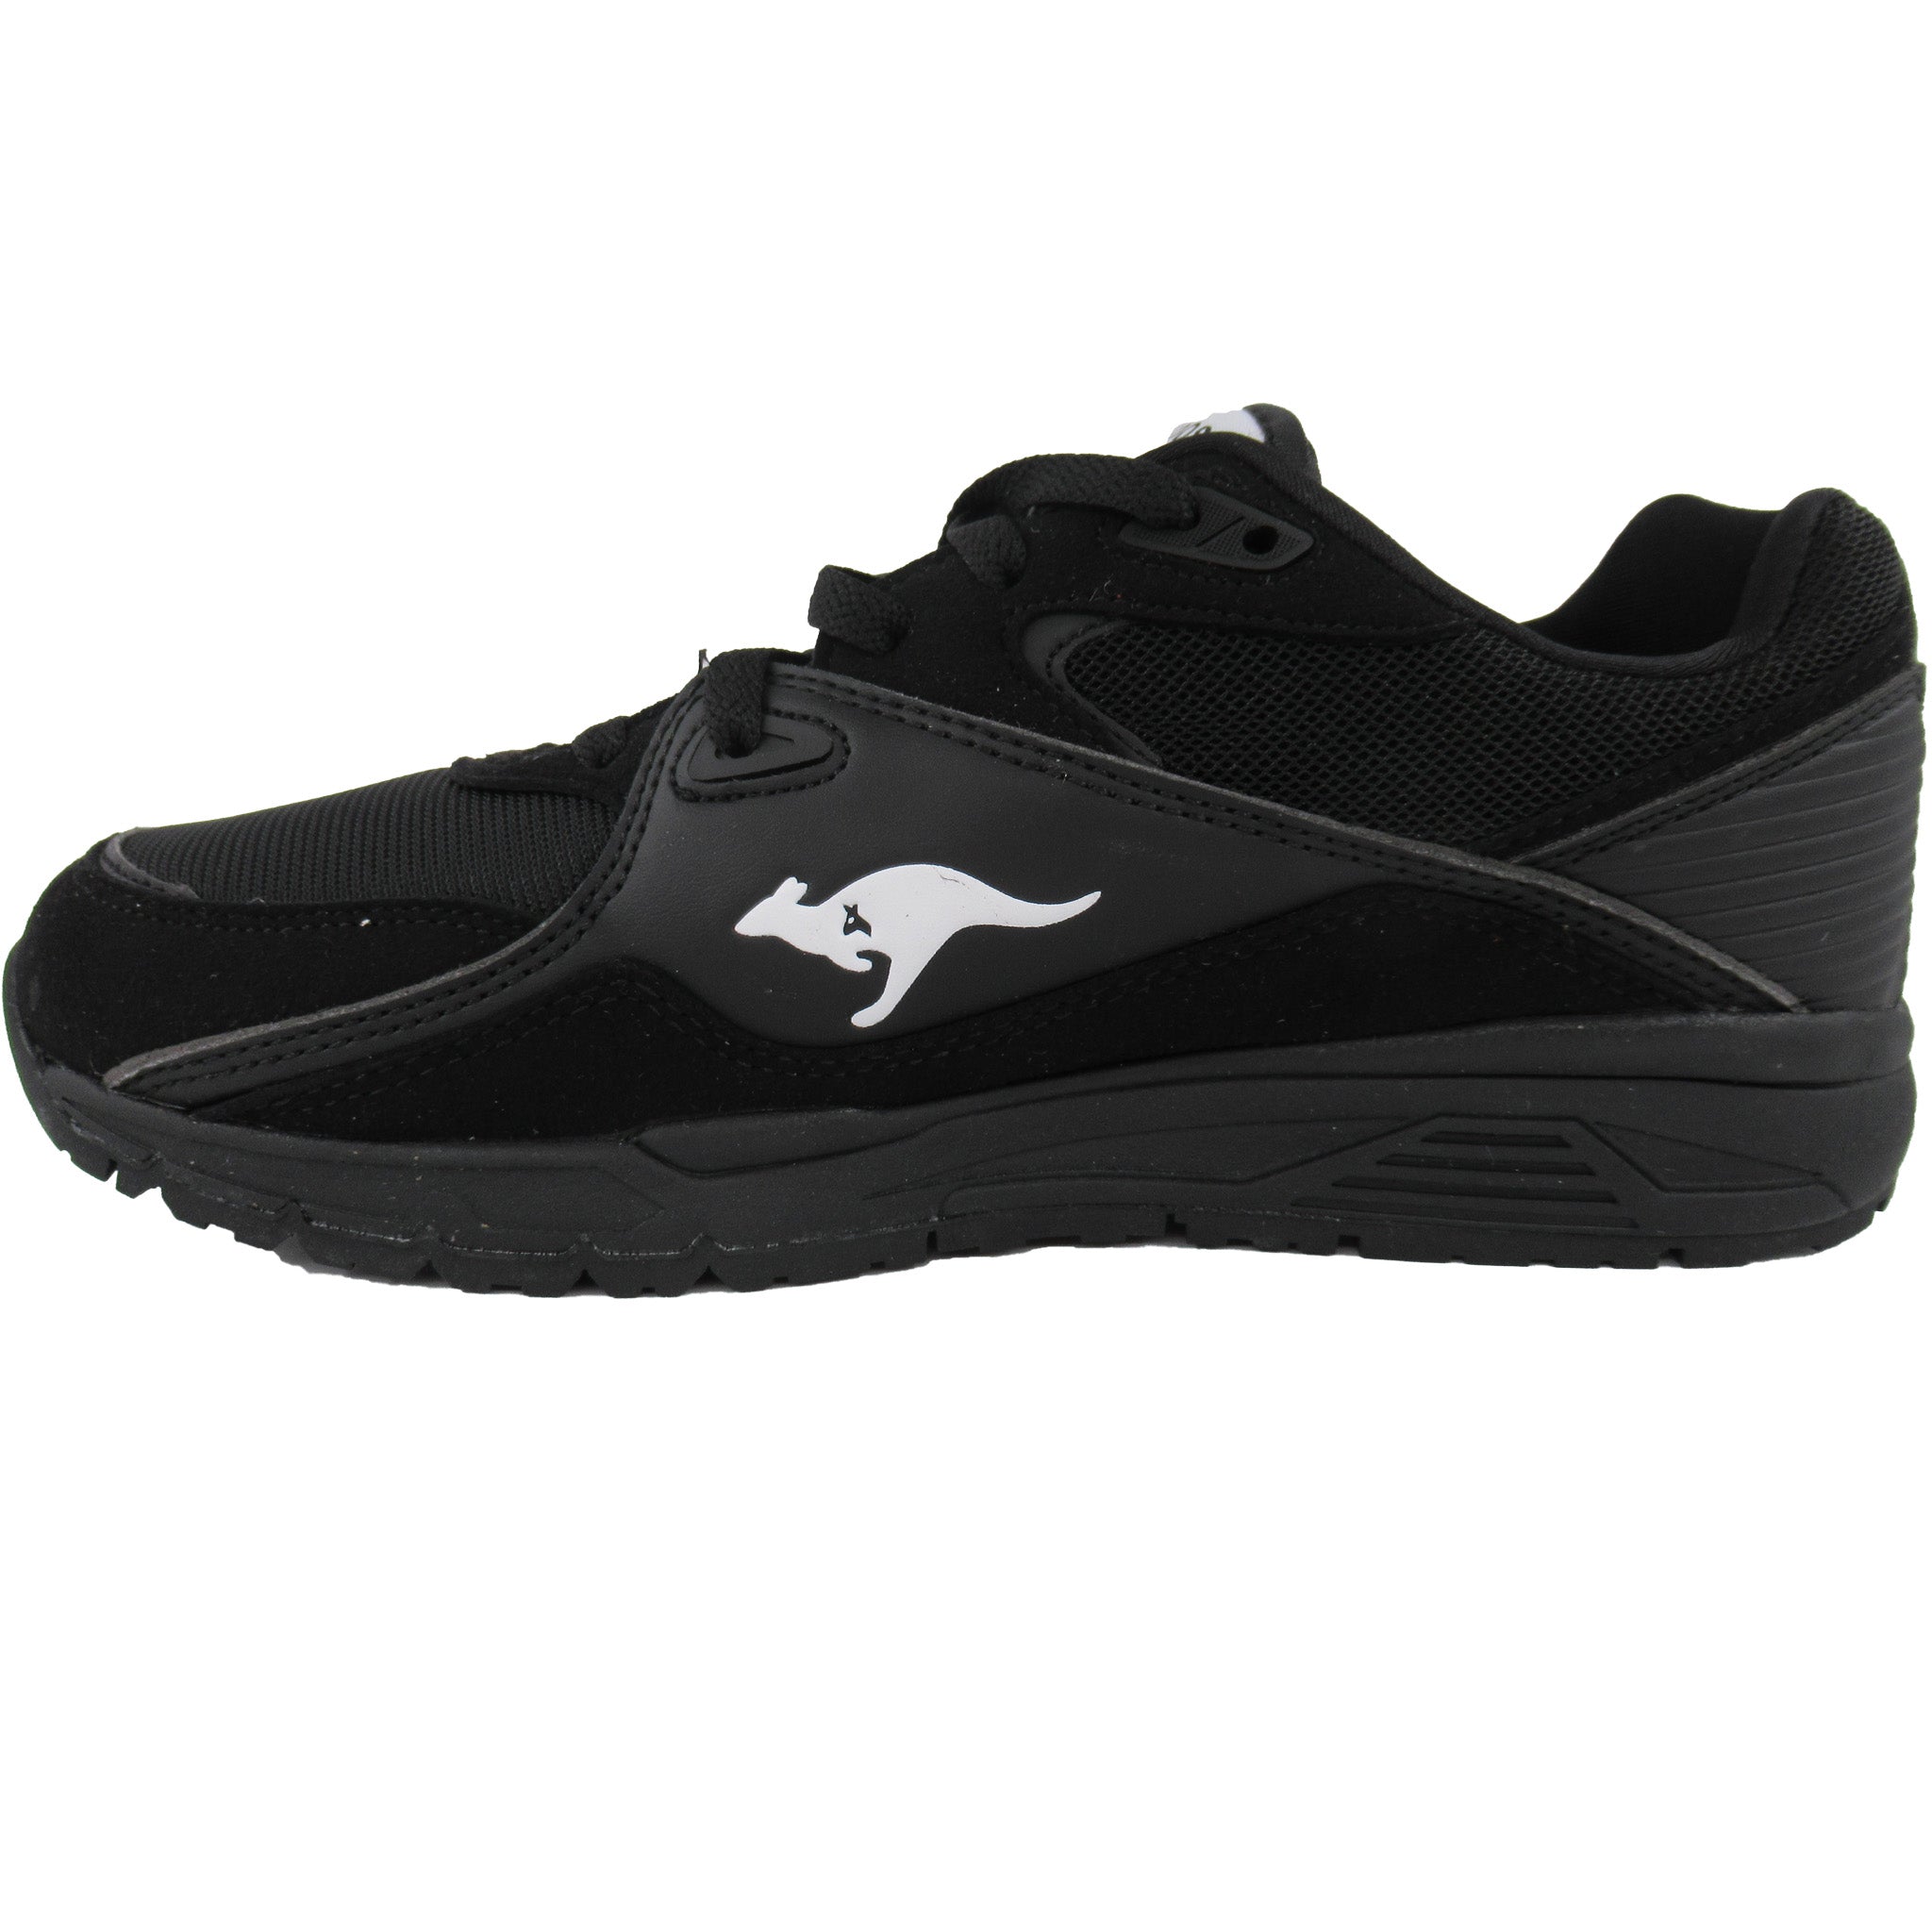 KangaROOS Roos Mens Runaway Classic Athletic Shoes – That Shoe Store More